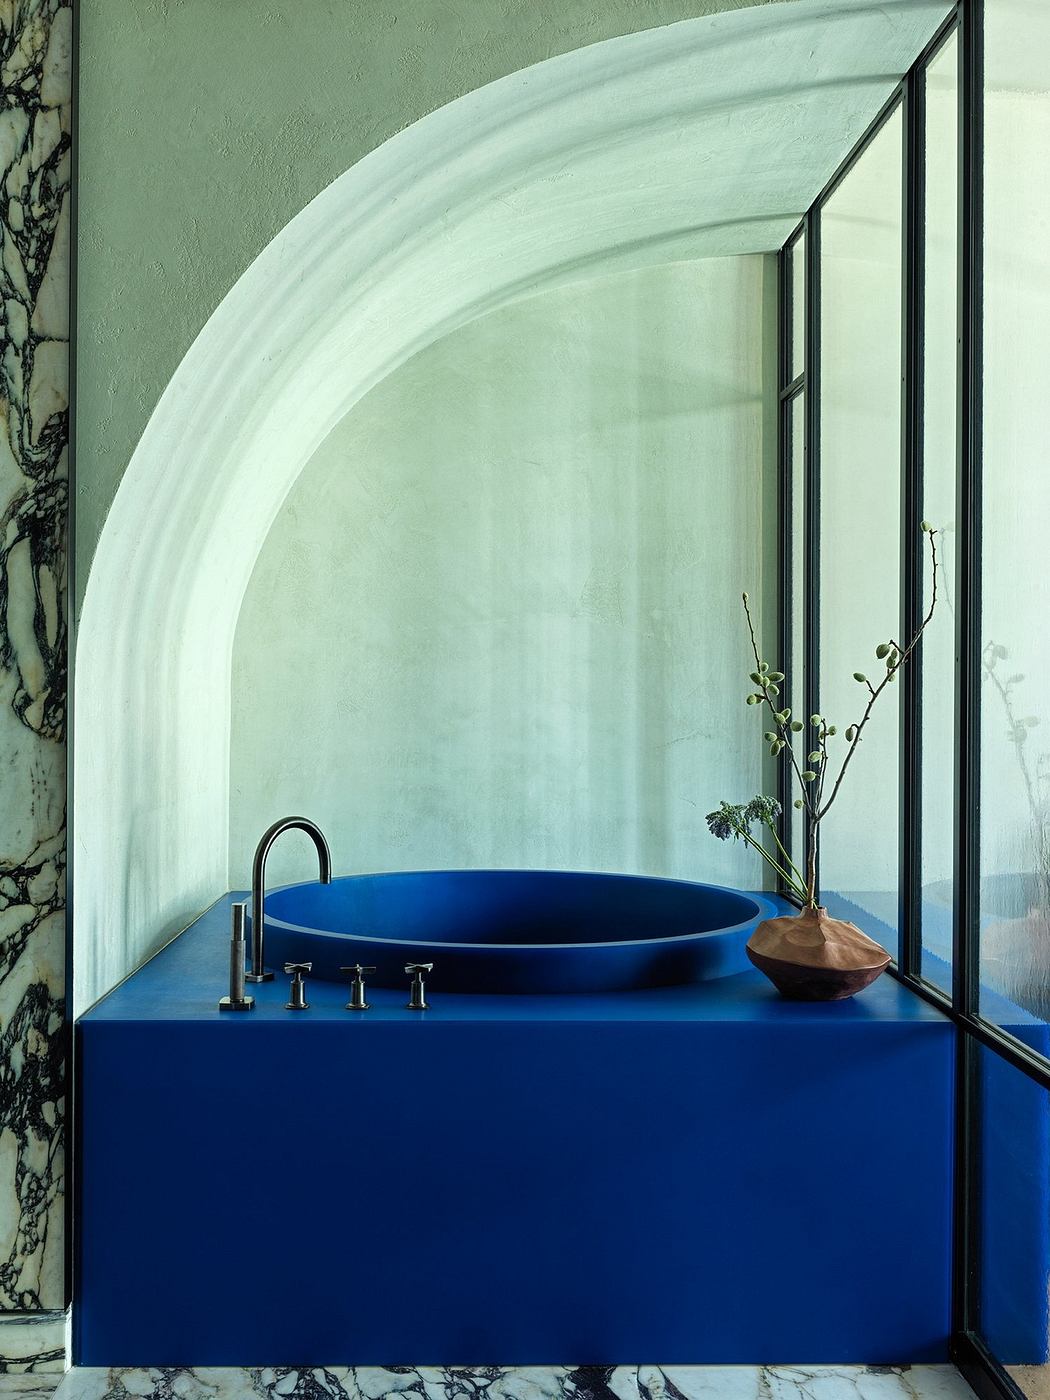 Modern bathroom with blue sink and arched niche.